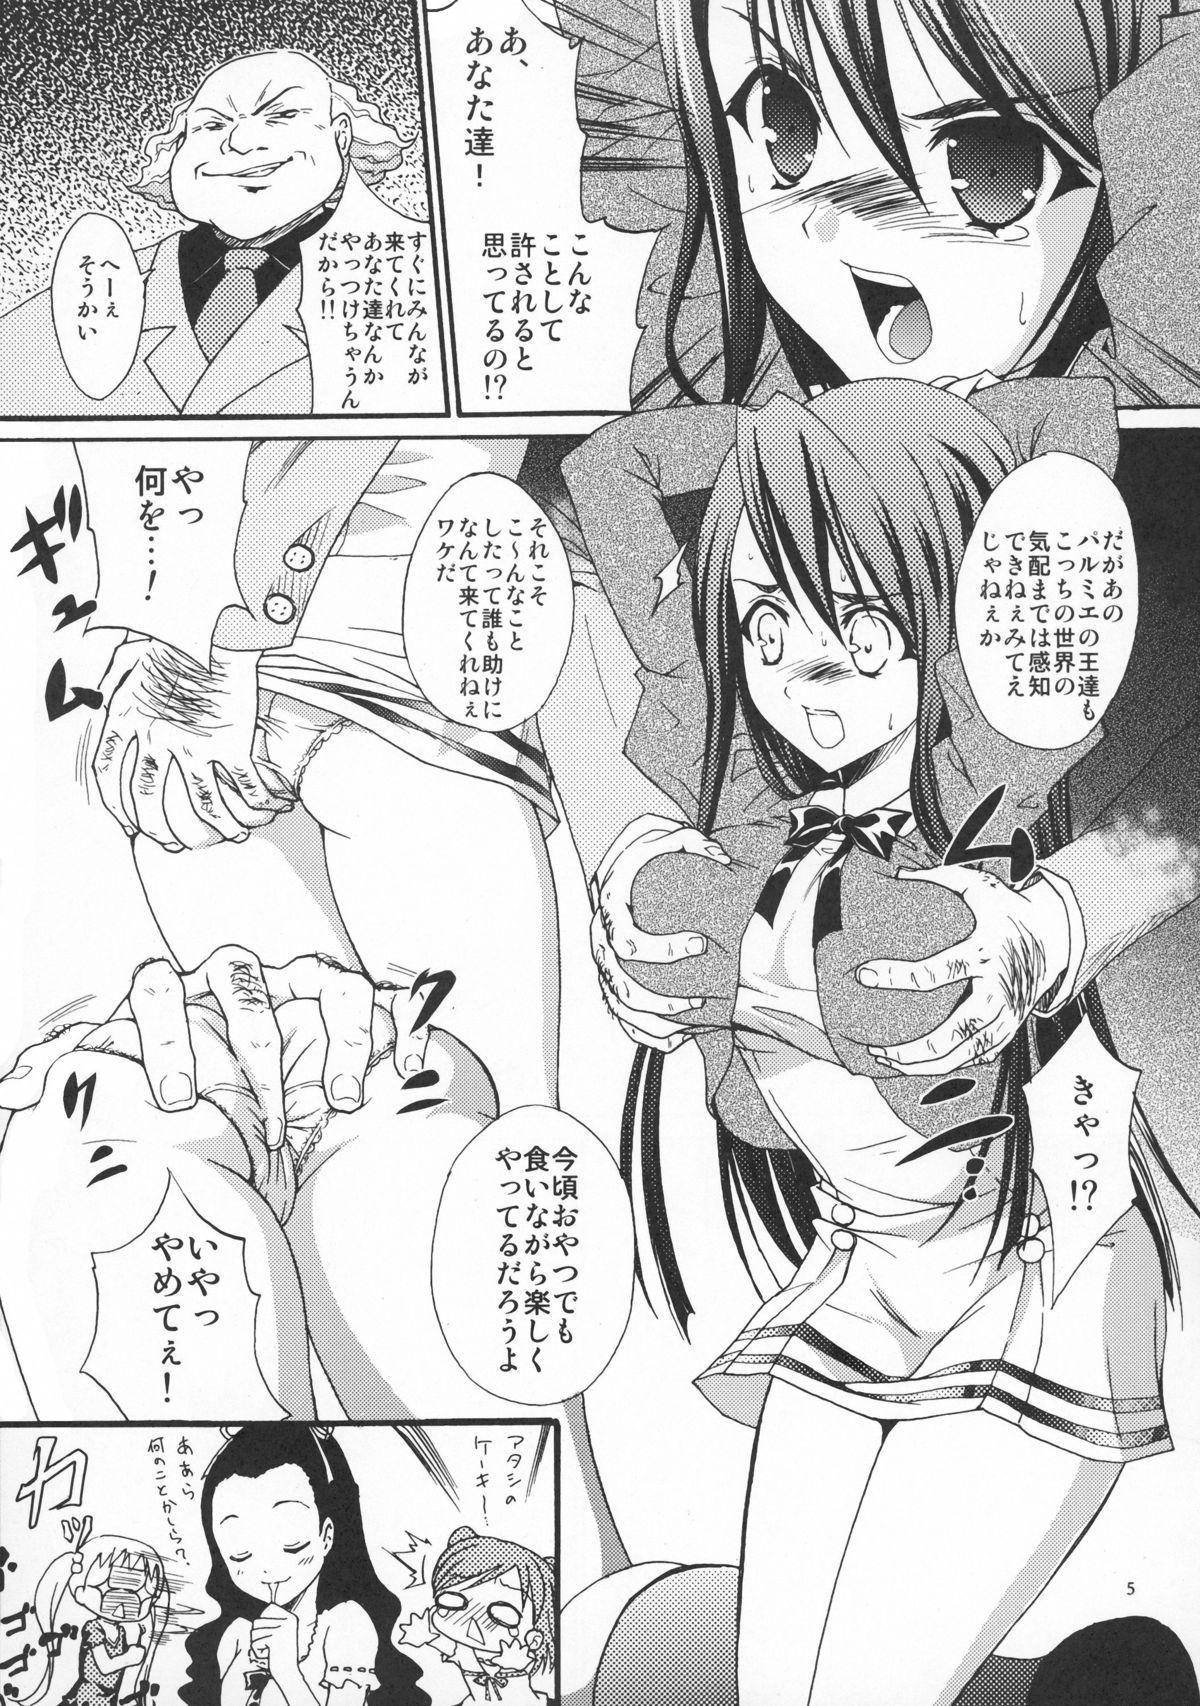 Sesso Anti-Heroine - Yes precure 5 Anal Porn - Page 5